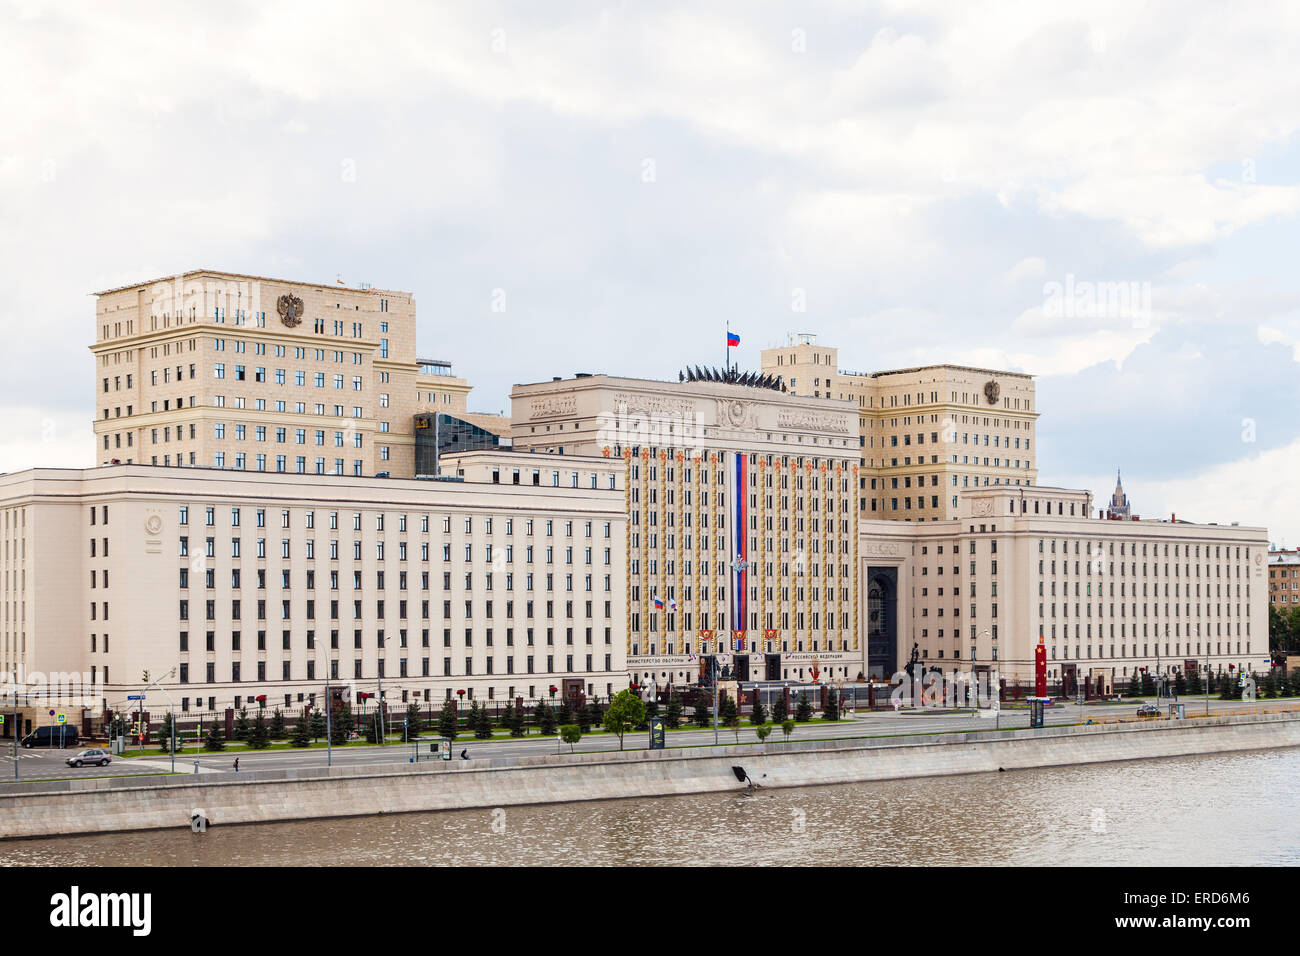 MOSCOW, RUSSIA - MAY 30, 2015: edifice of the Ministry of Defense of Russia on Frunzenskaya embankment in Moscow, Russia Stock Photo